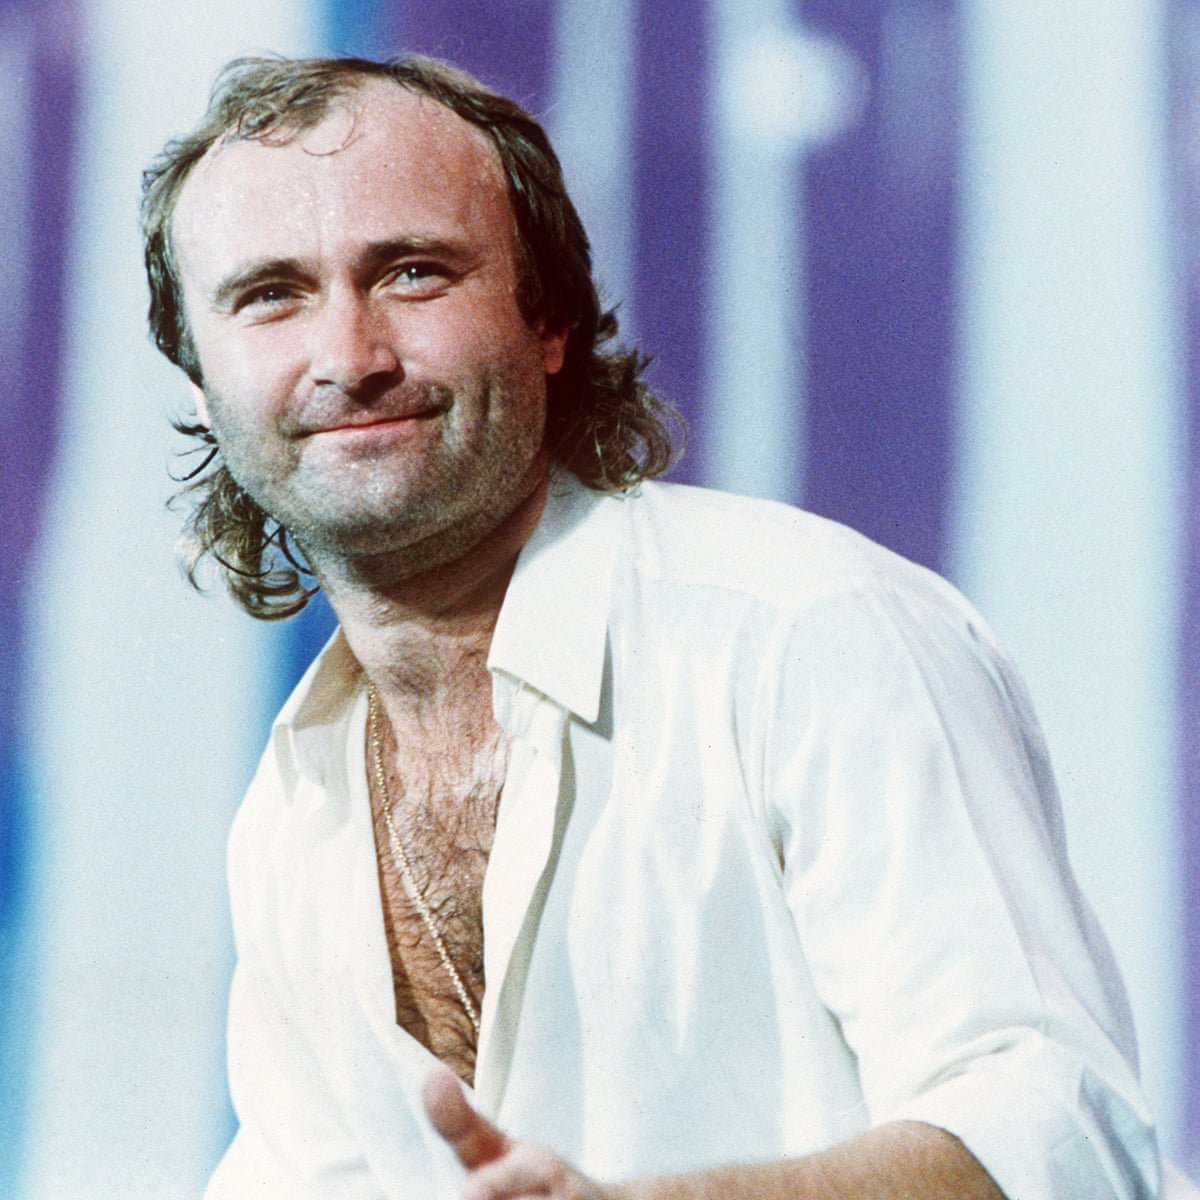 Against all odds: why Phil Collins' comeback could save pop music | Phil  Collins | The Guardian